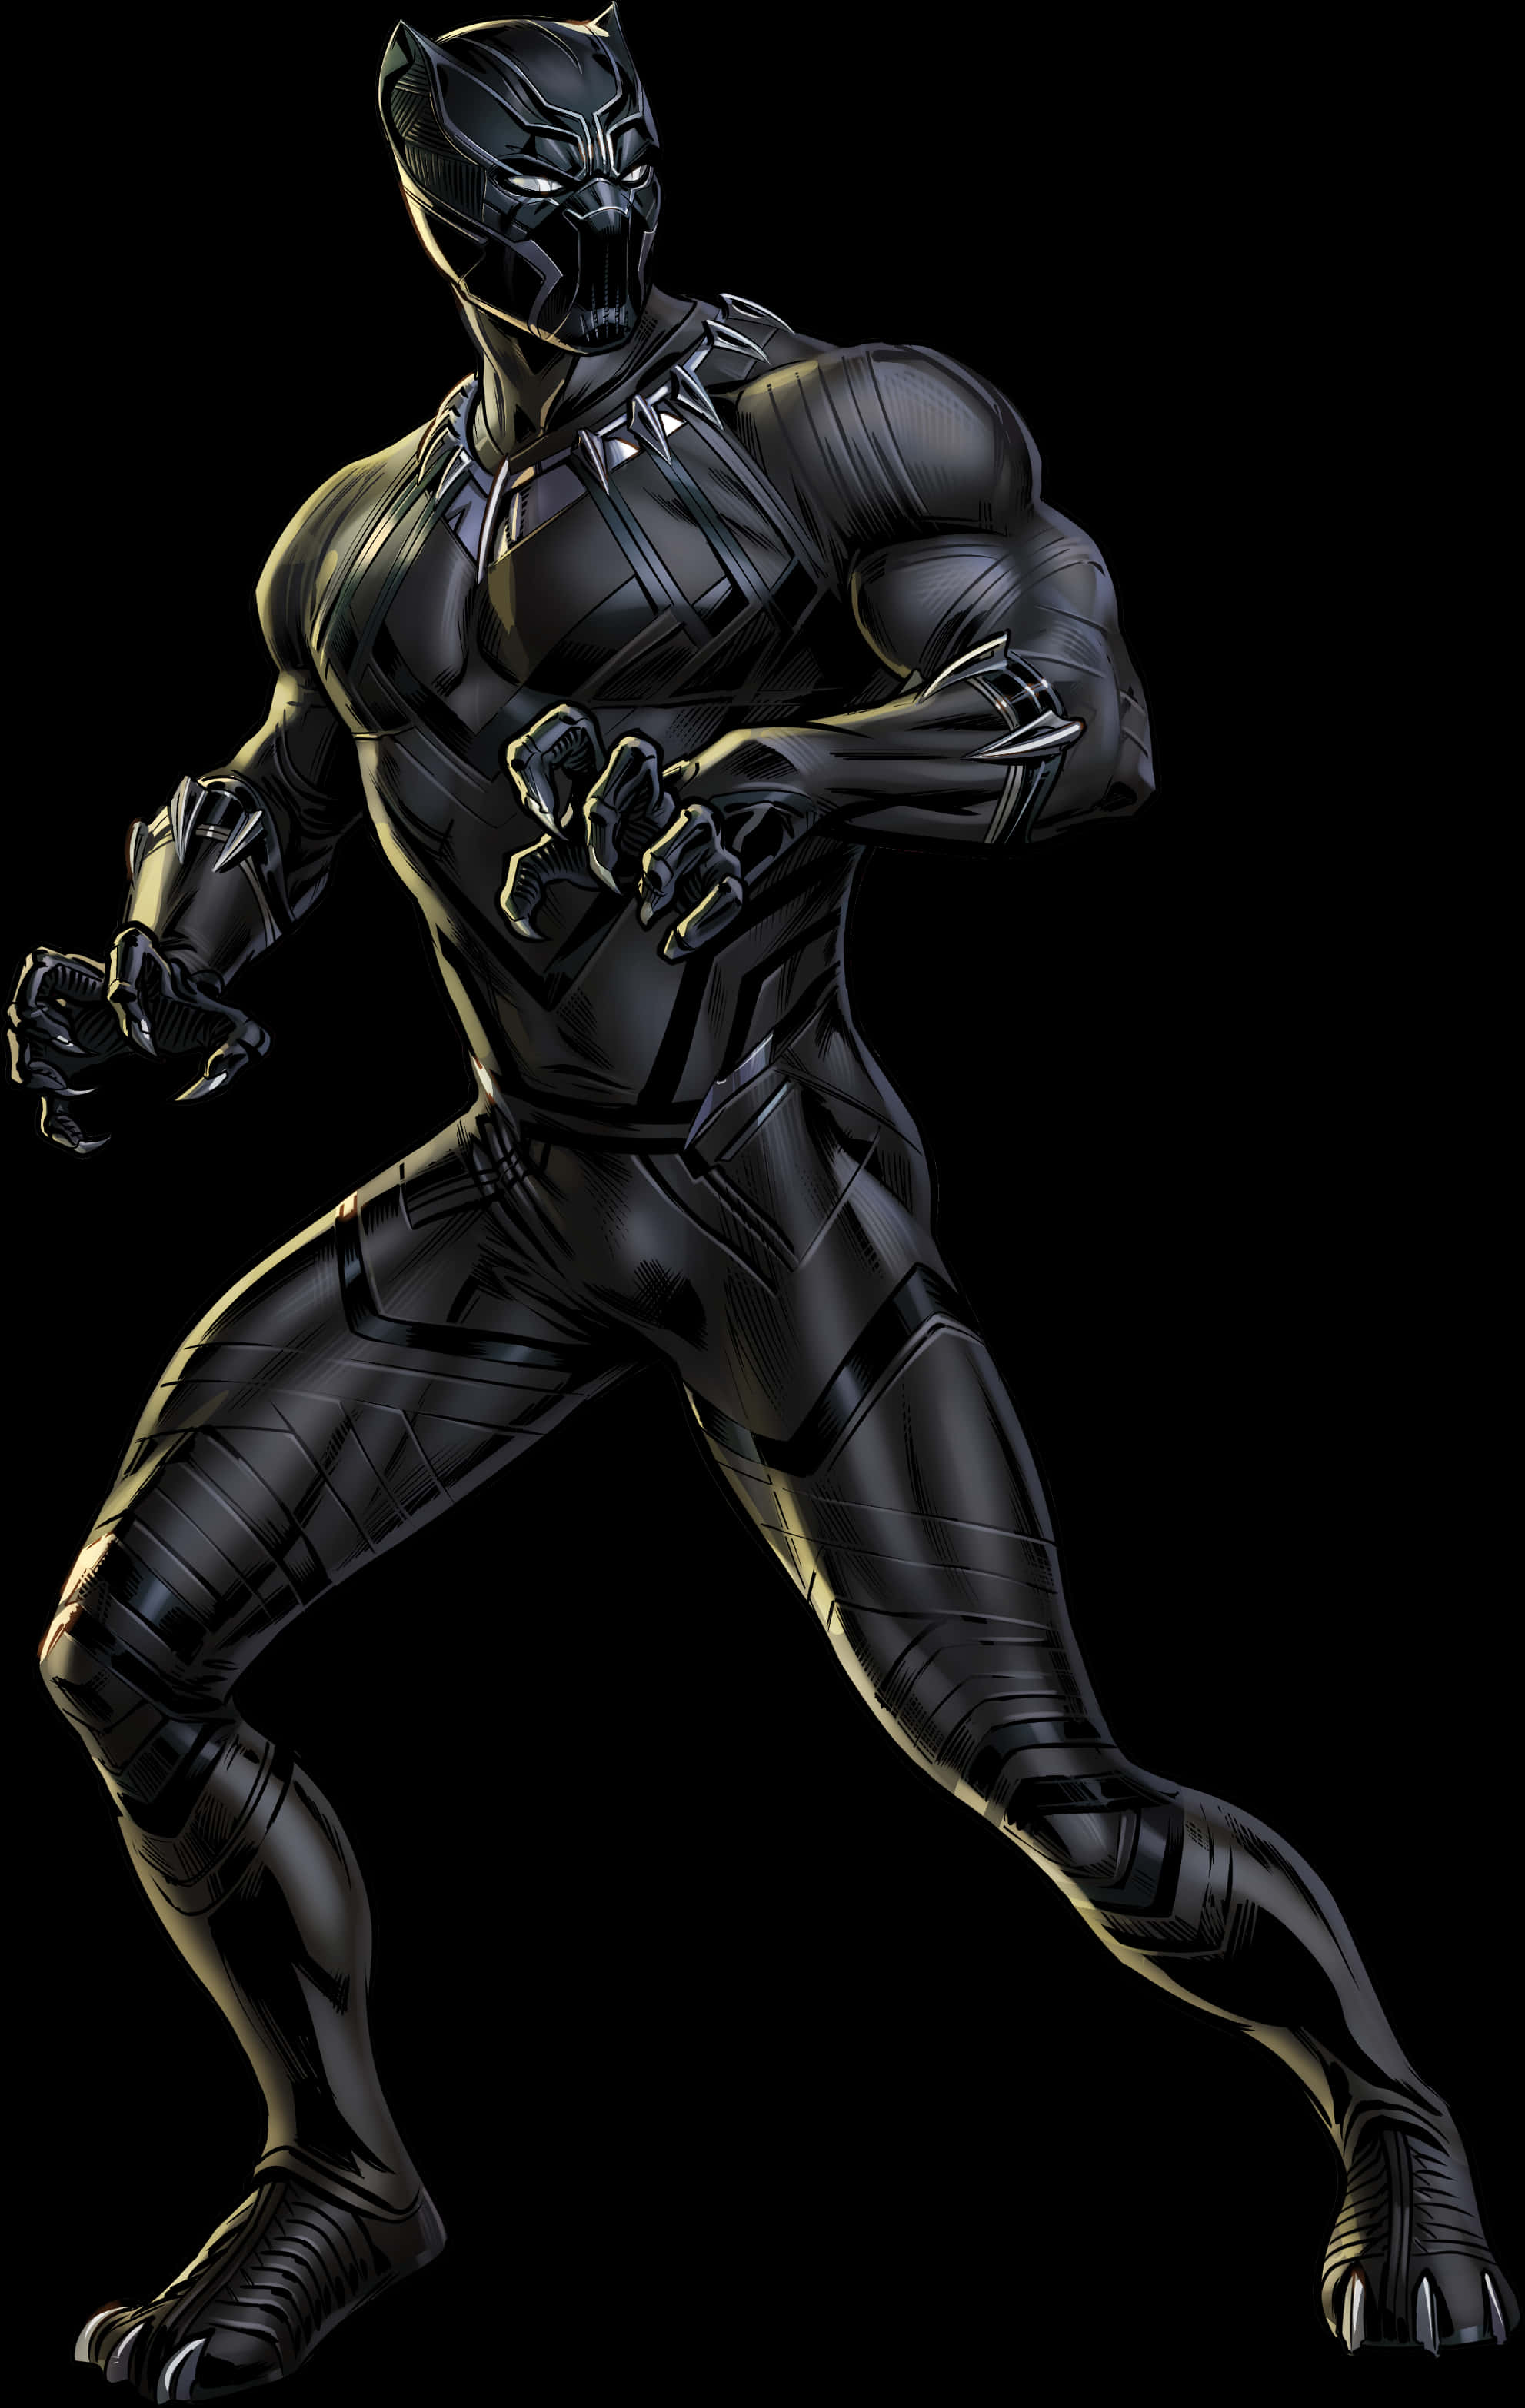 A Black Panther In A Black Garment